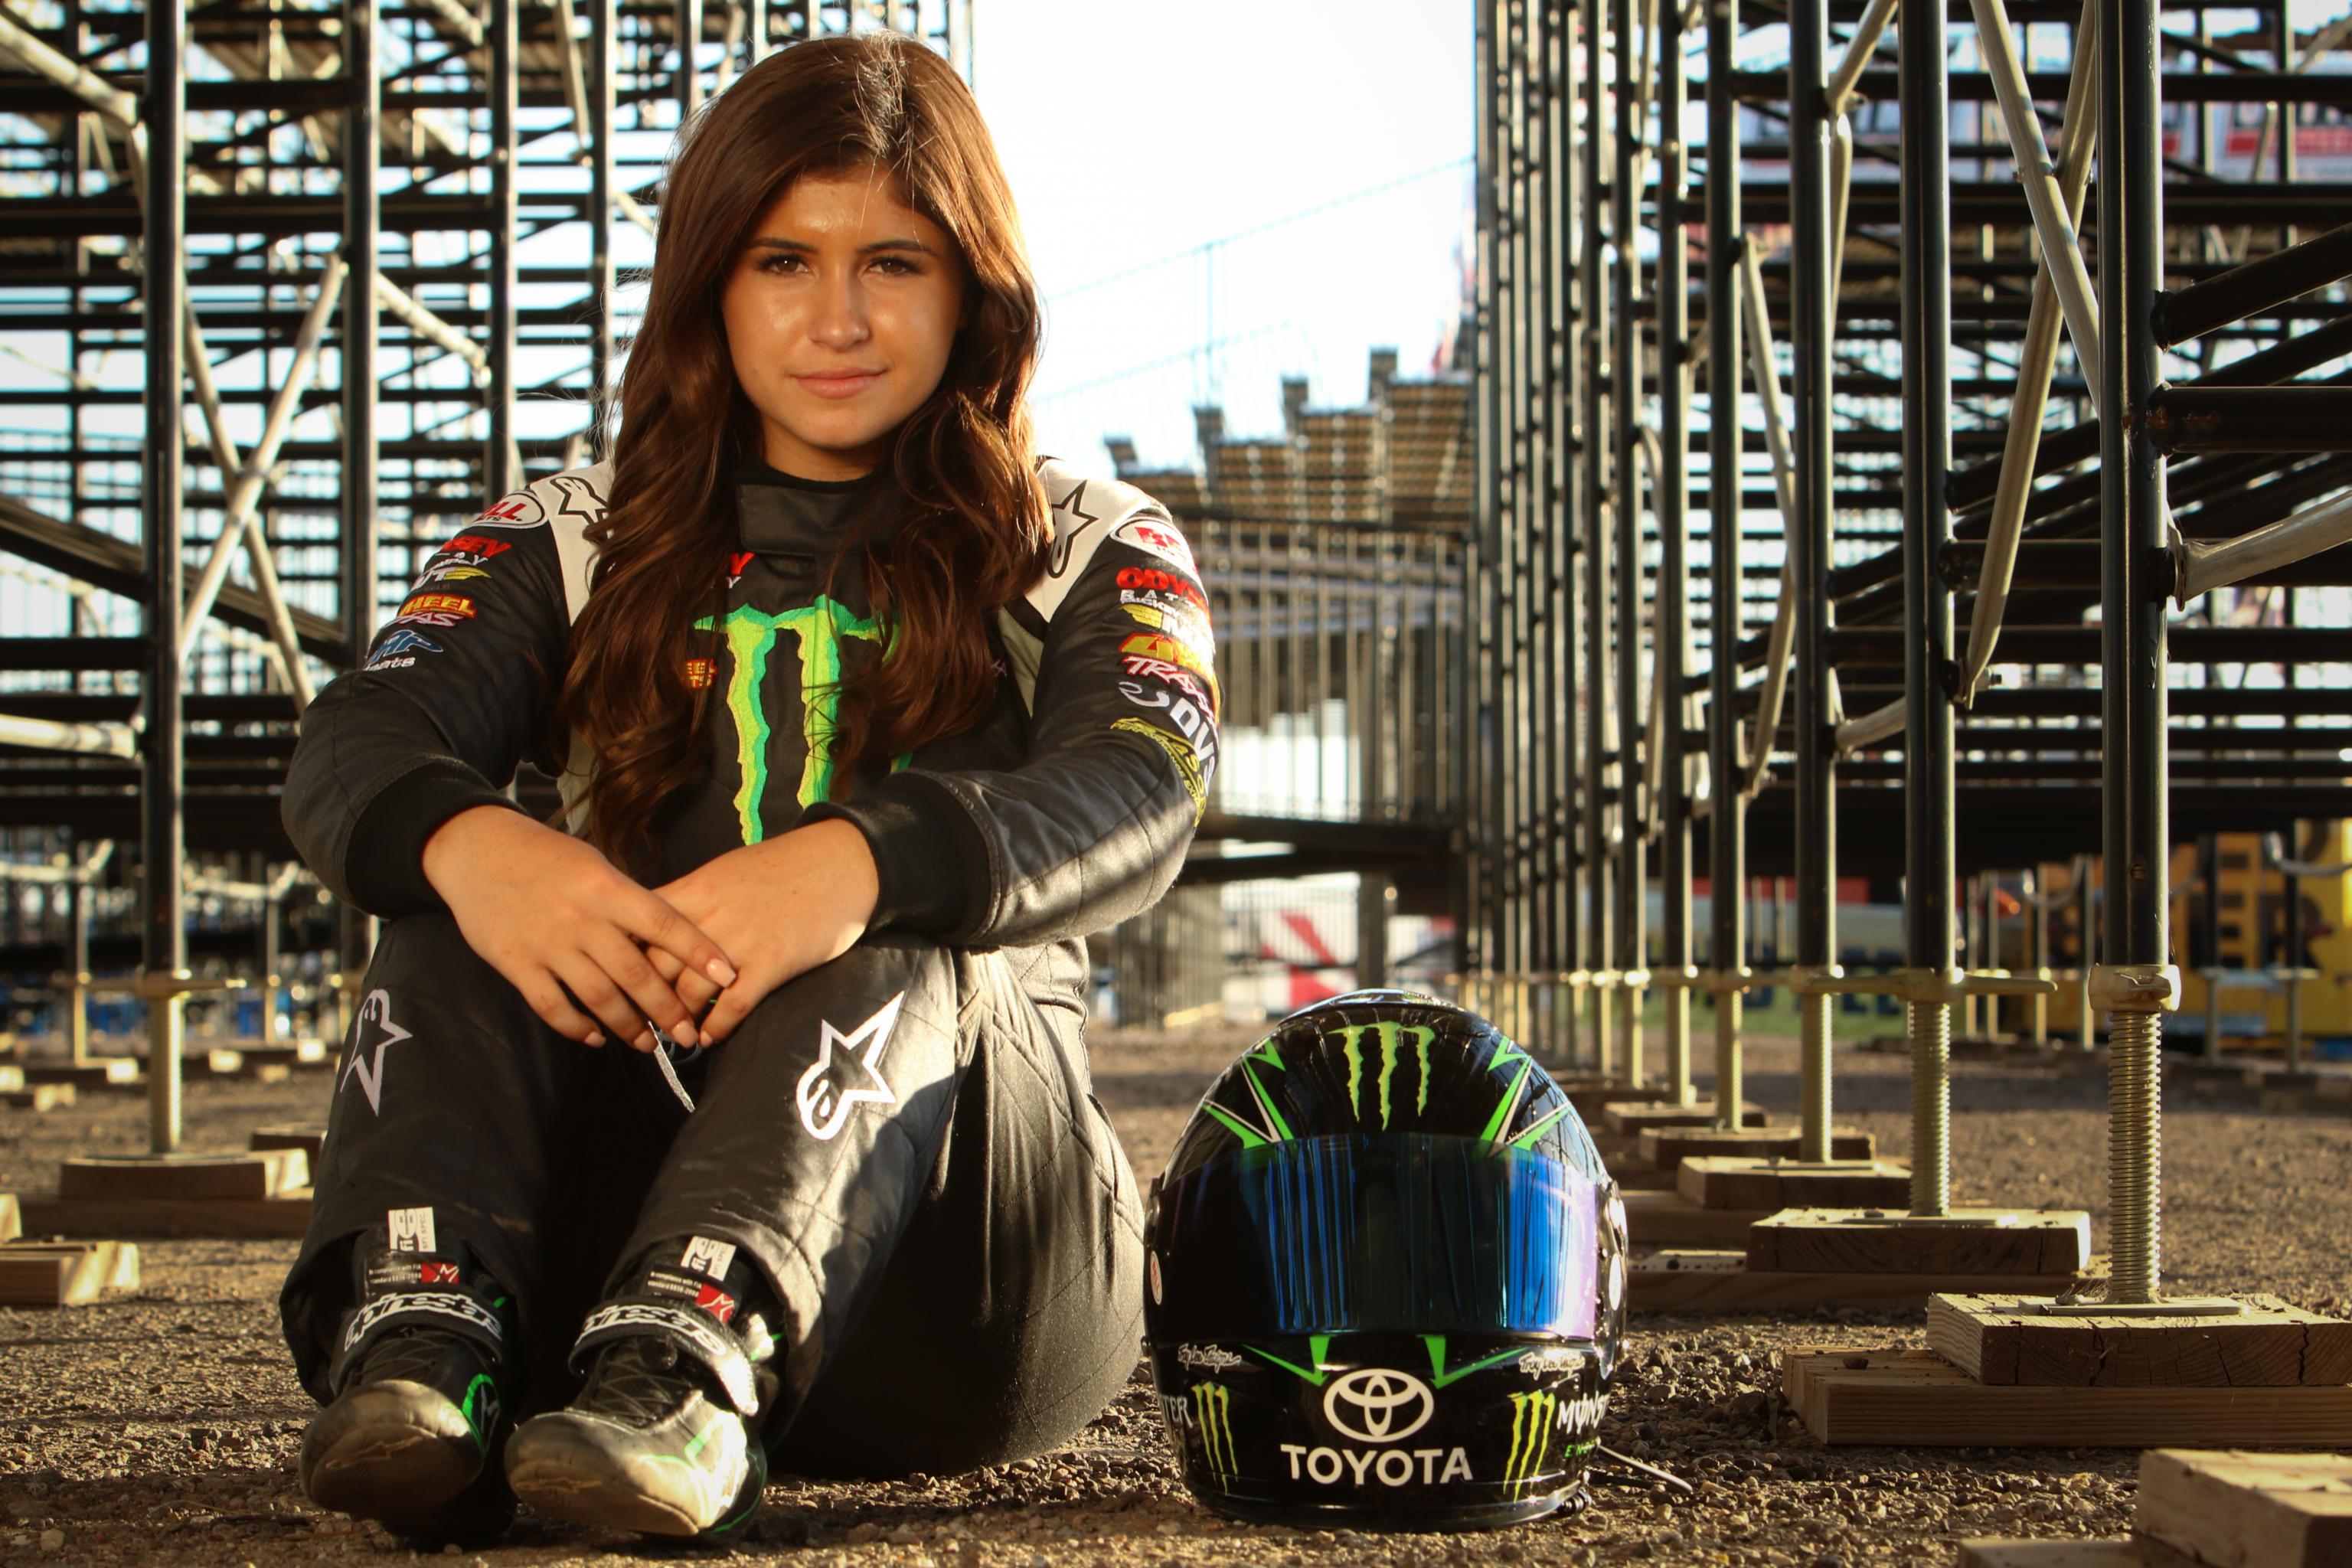 Hailie Deegan Just Turned 16 And She Can Already Drive Better Than You